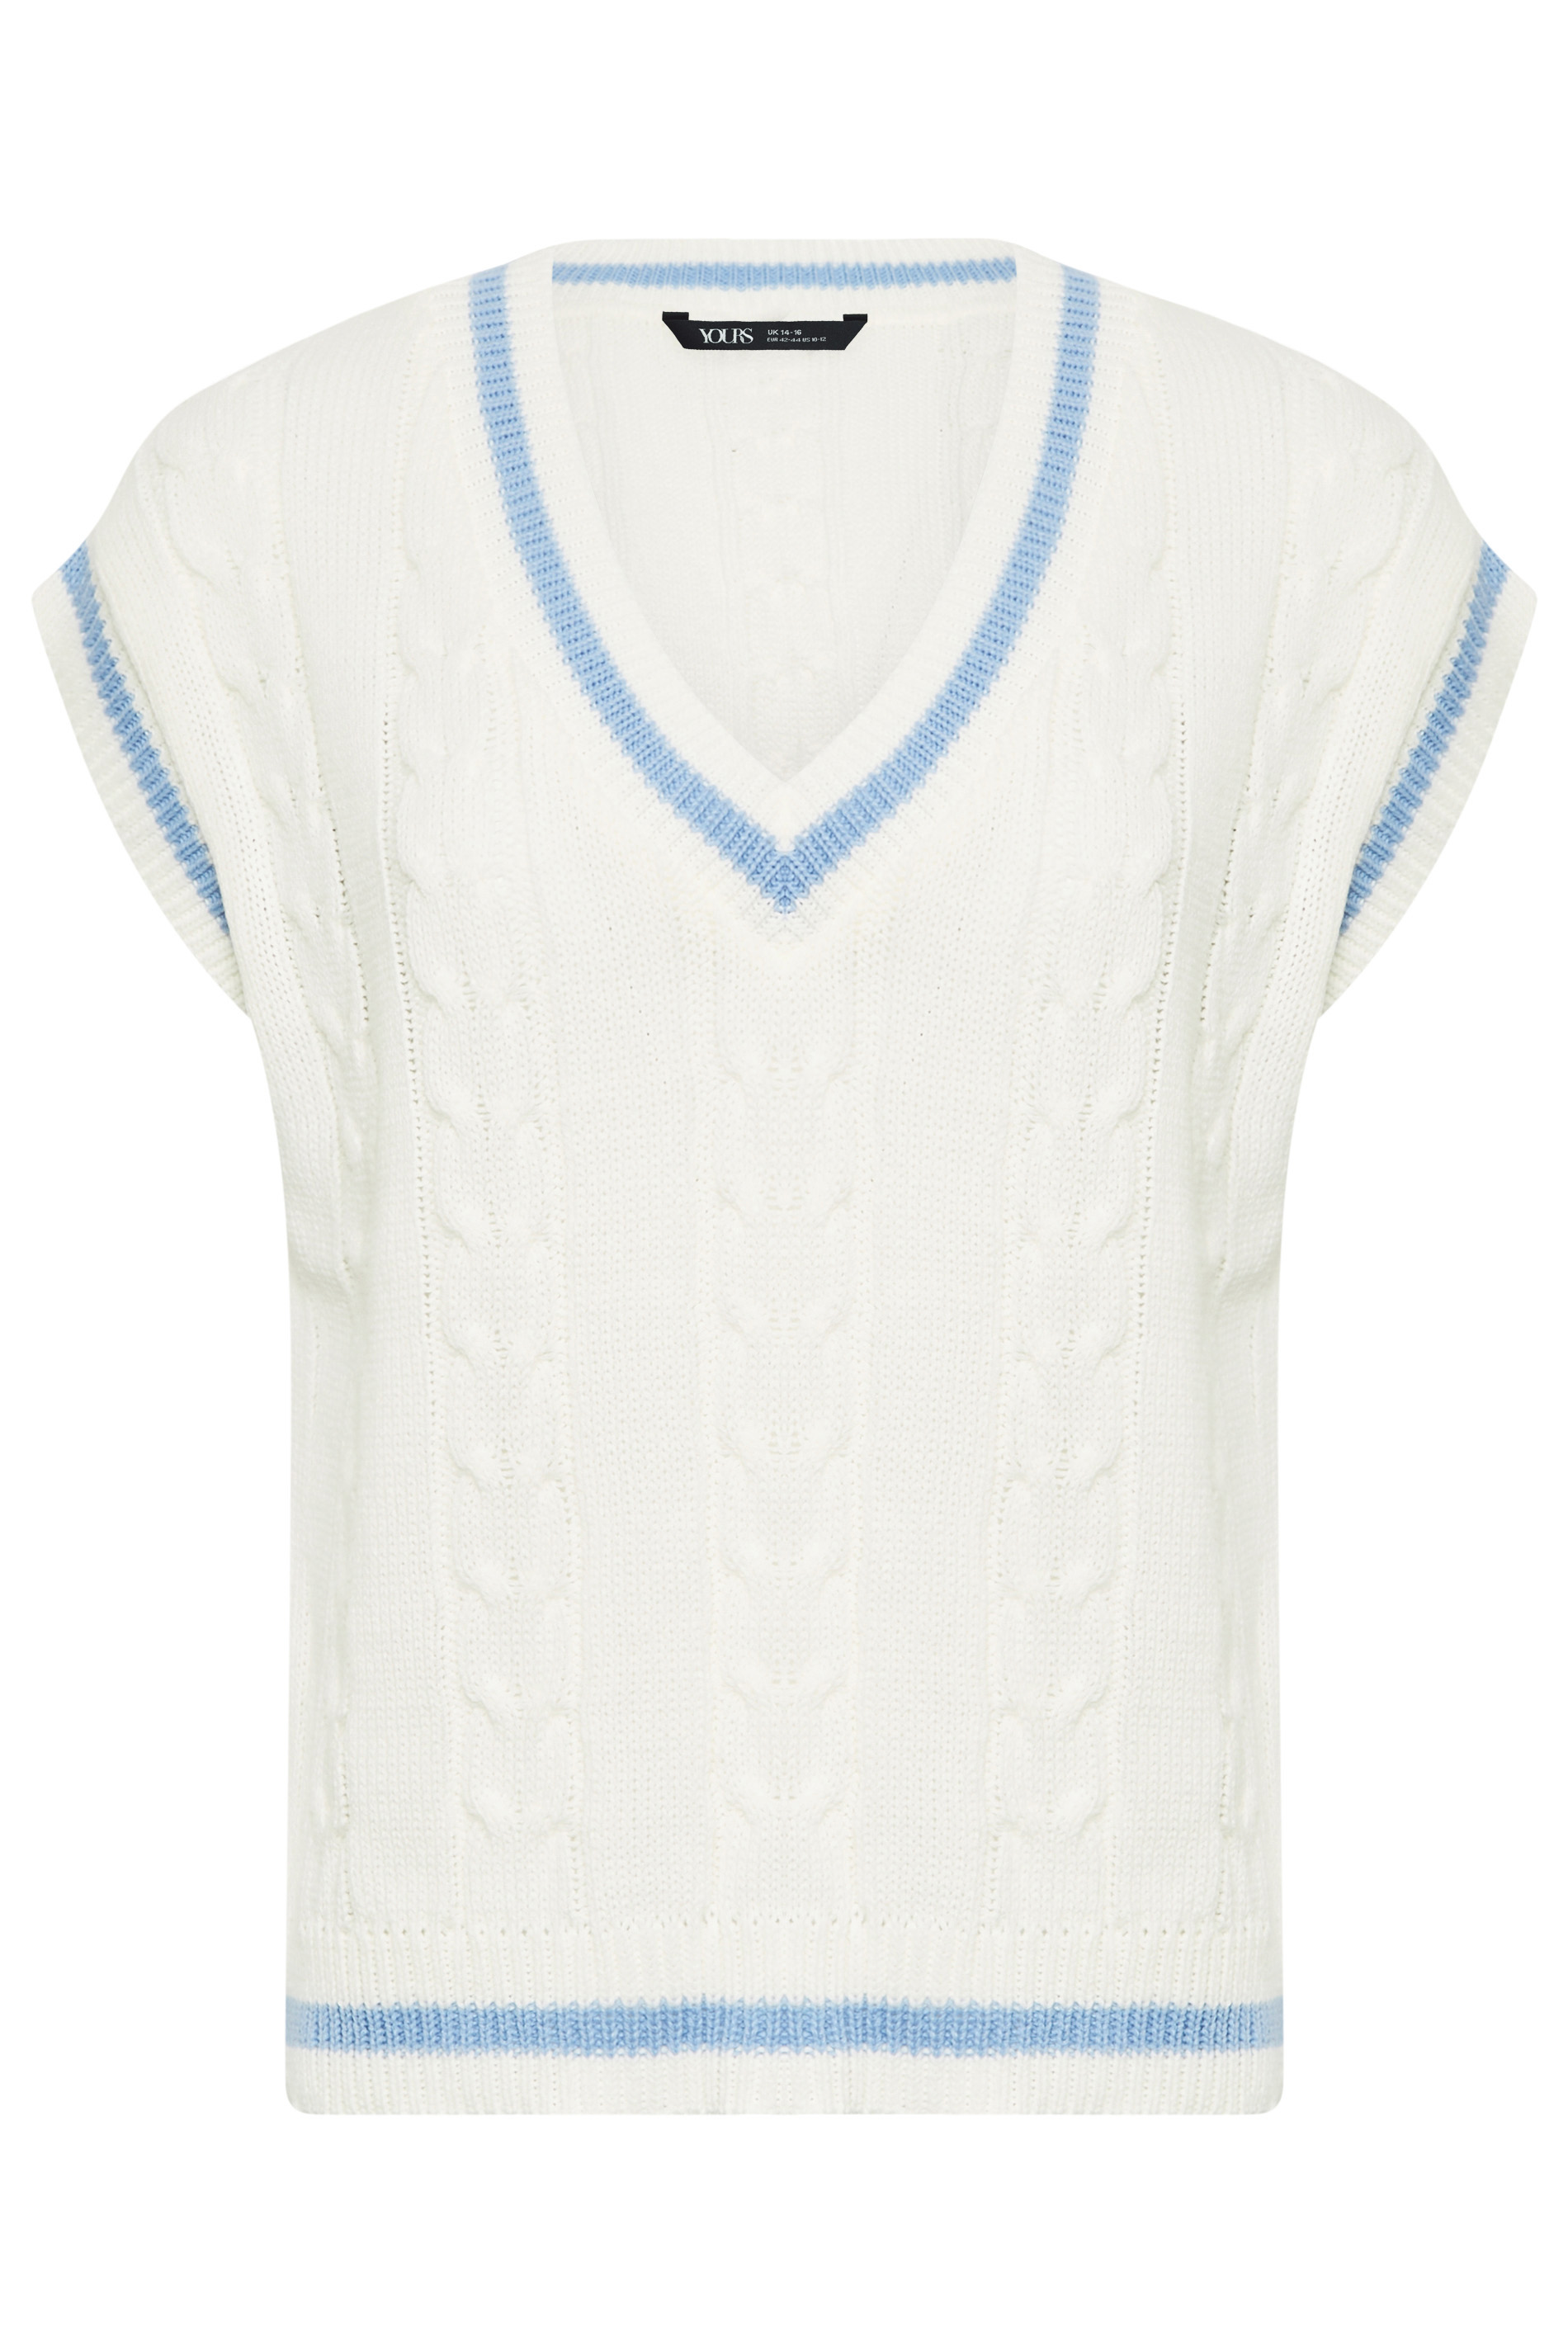 YOURS PETITE Plus Size White Cricket Knitted Vest Top | Yours Clothing 1